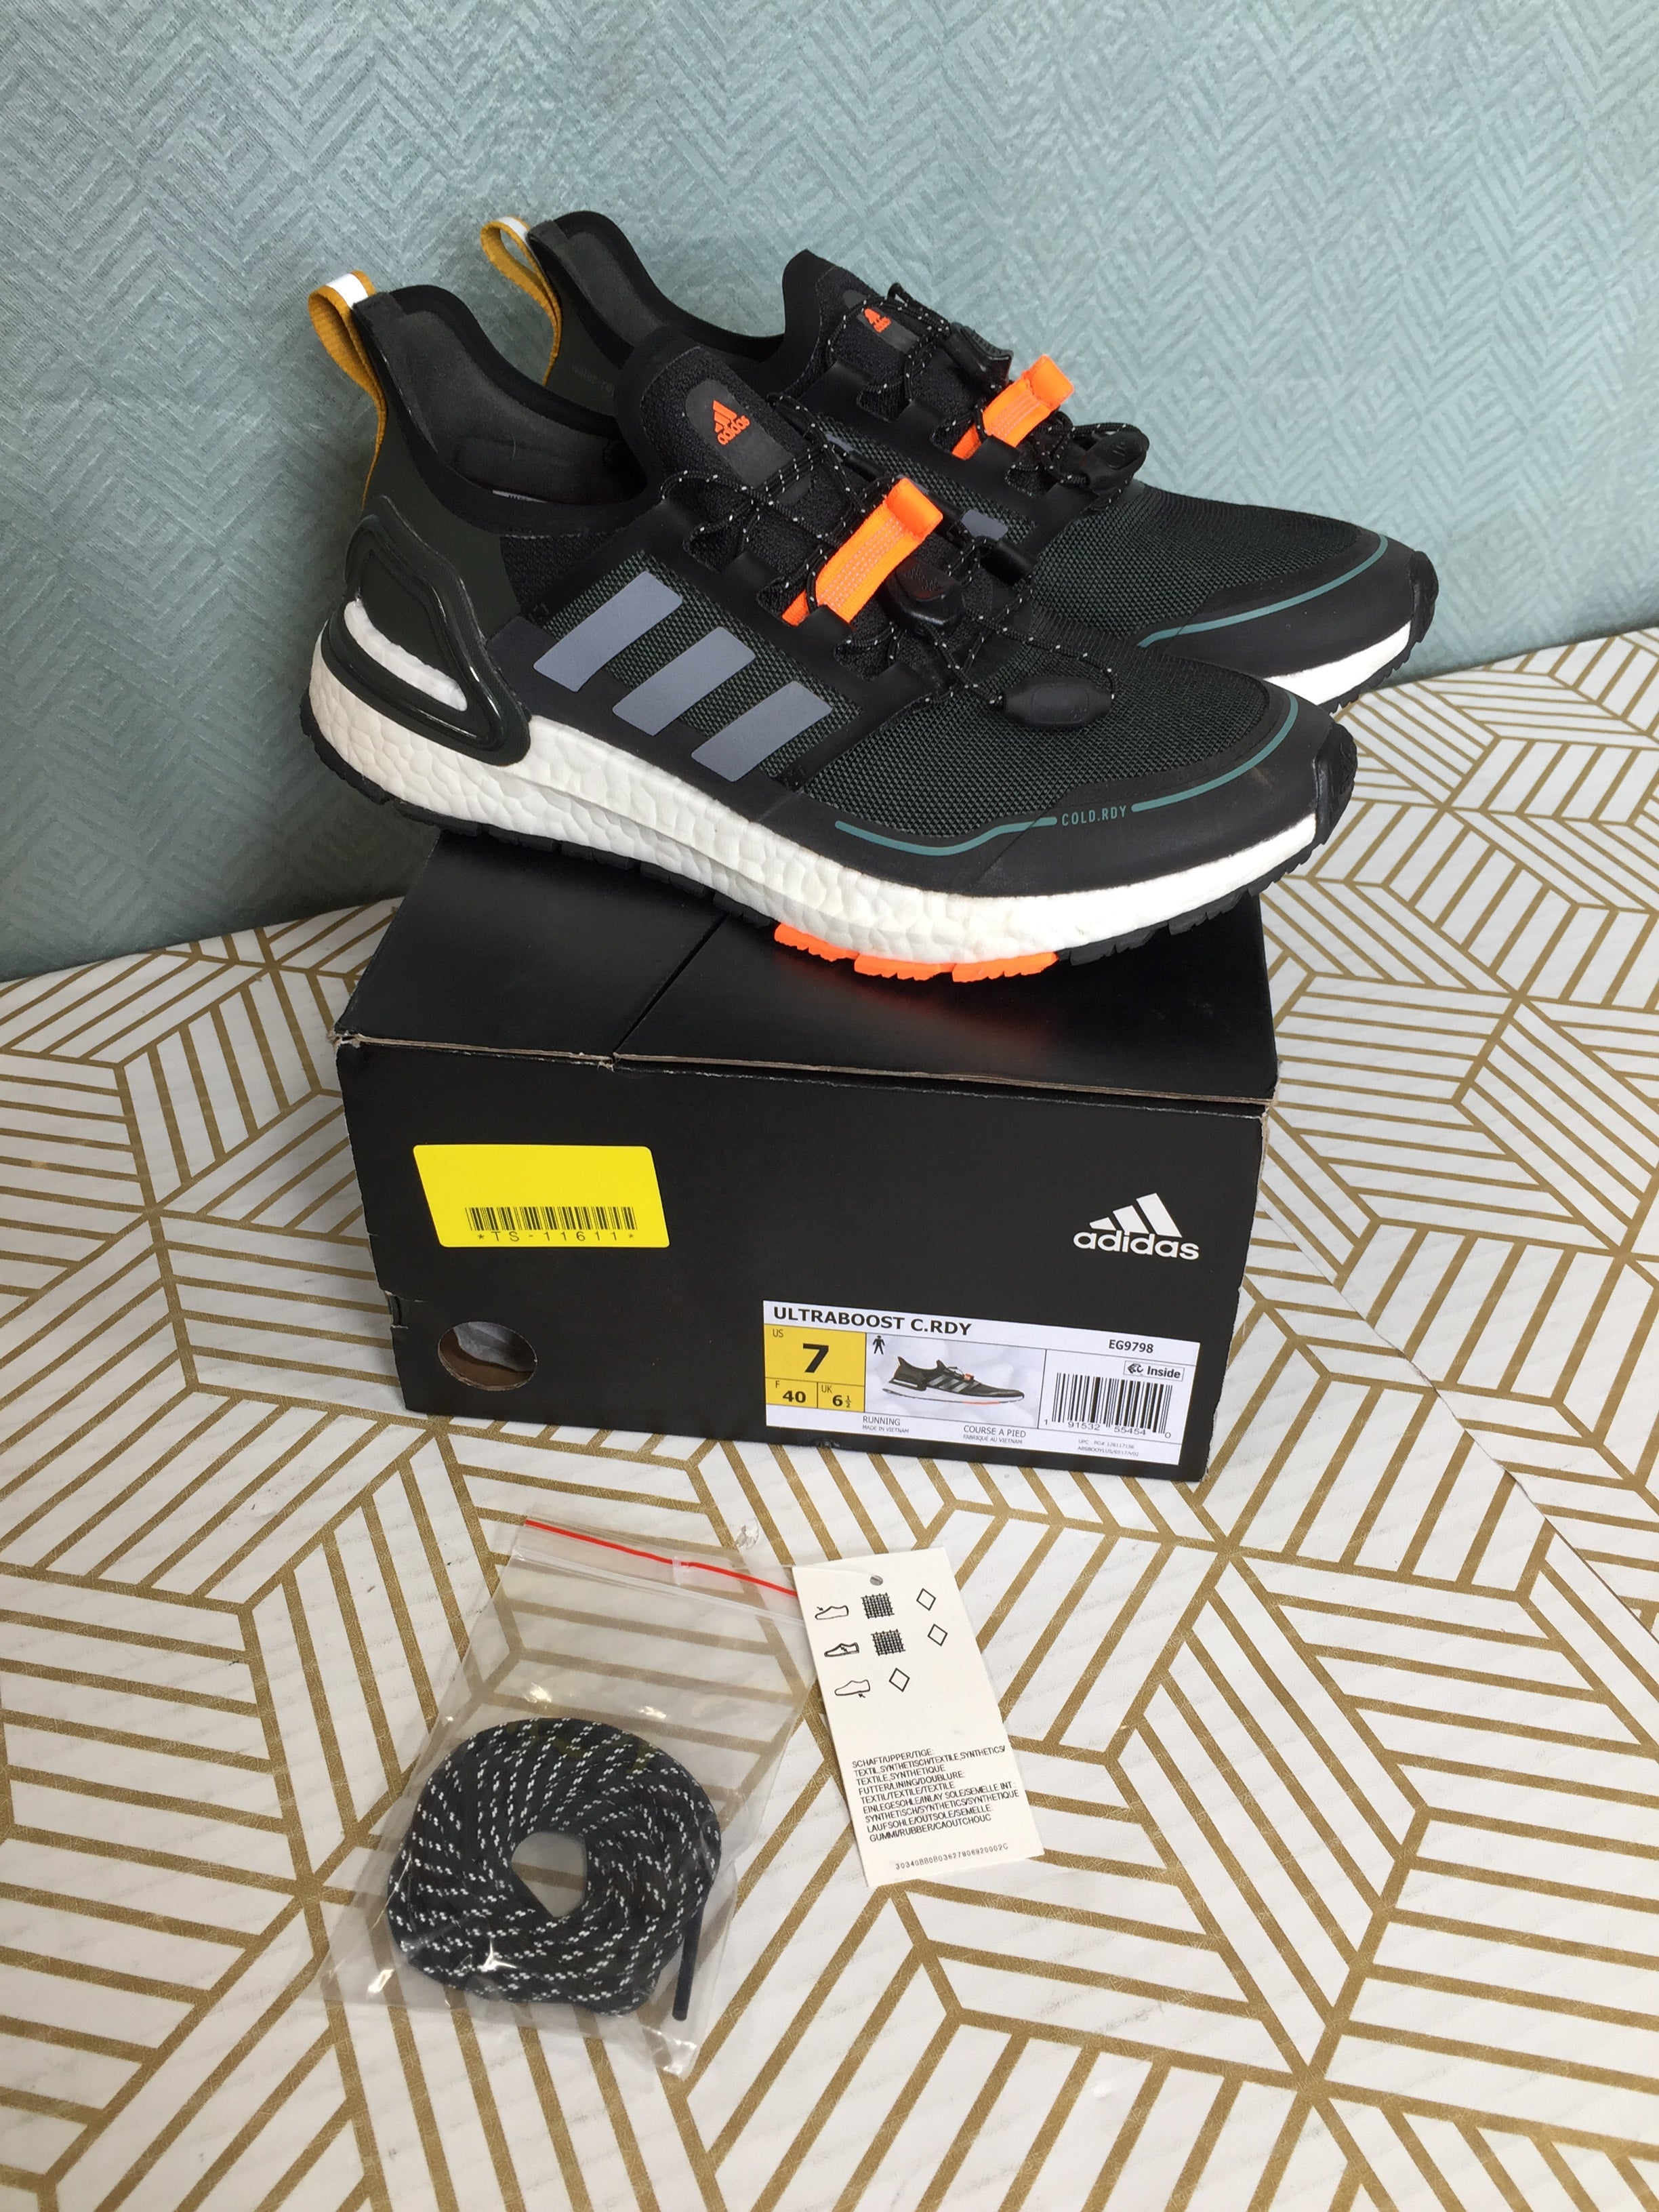 adidas Men's US Size 7 Ultraboost C.rdy Running Shoe *WITH TAGS* (7863651991790)